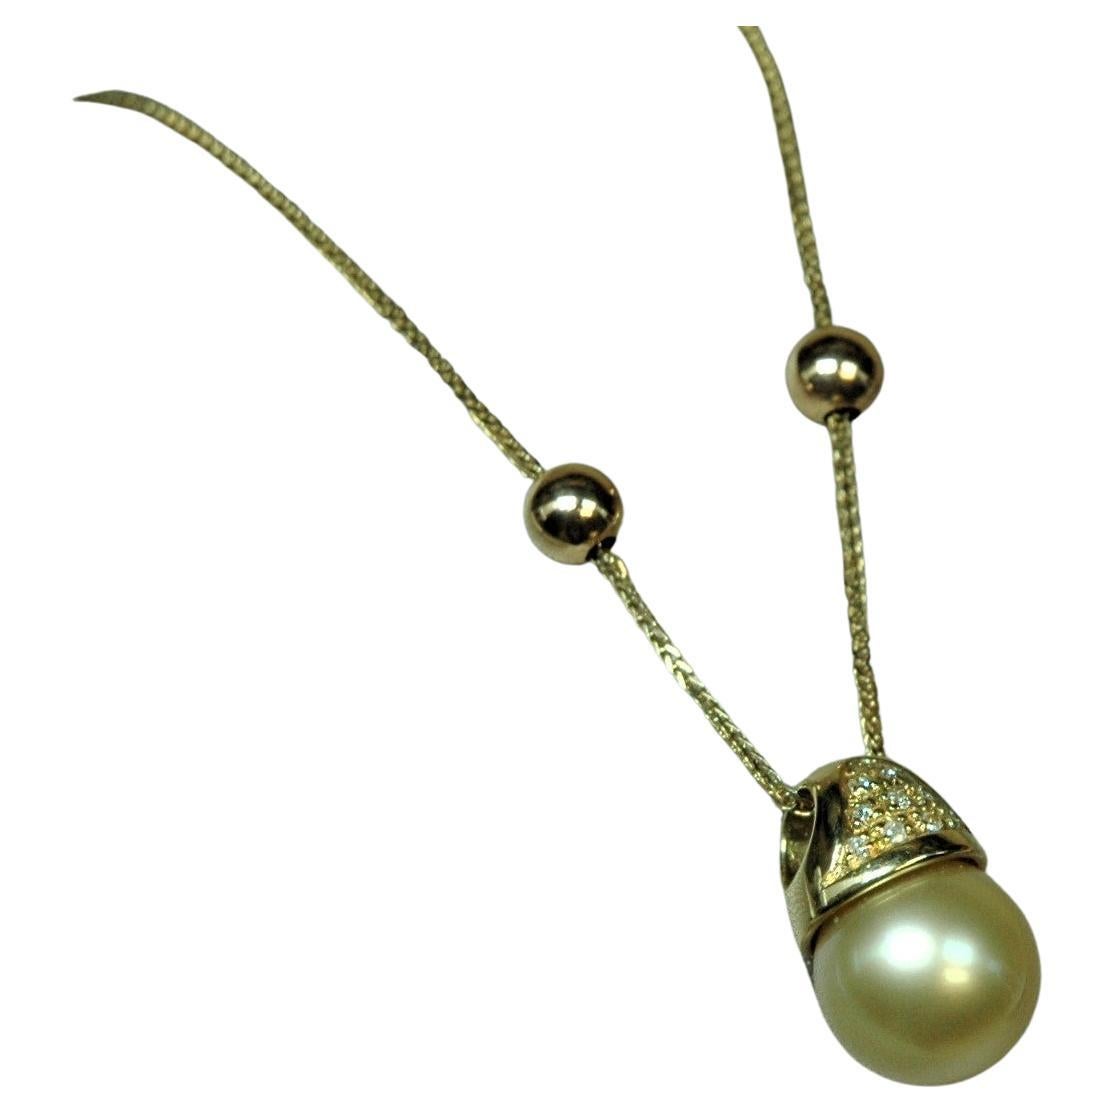 18 Kt Yellow Gold Pendant Necklace with Diamonds and a Gold Pearl